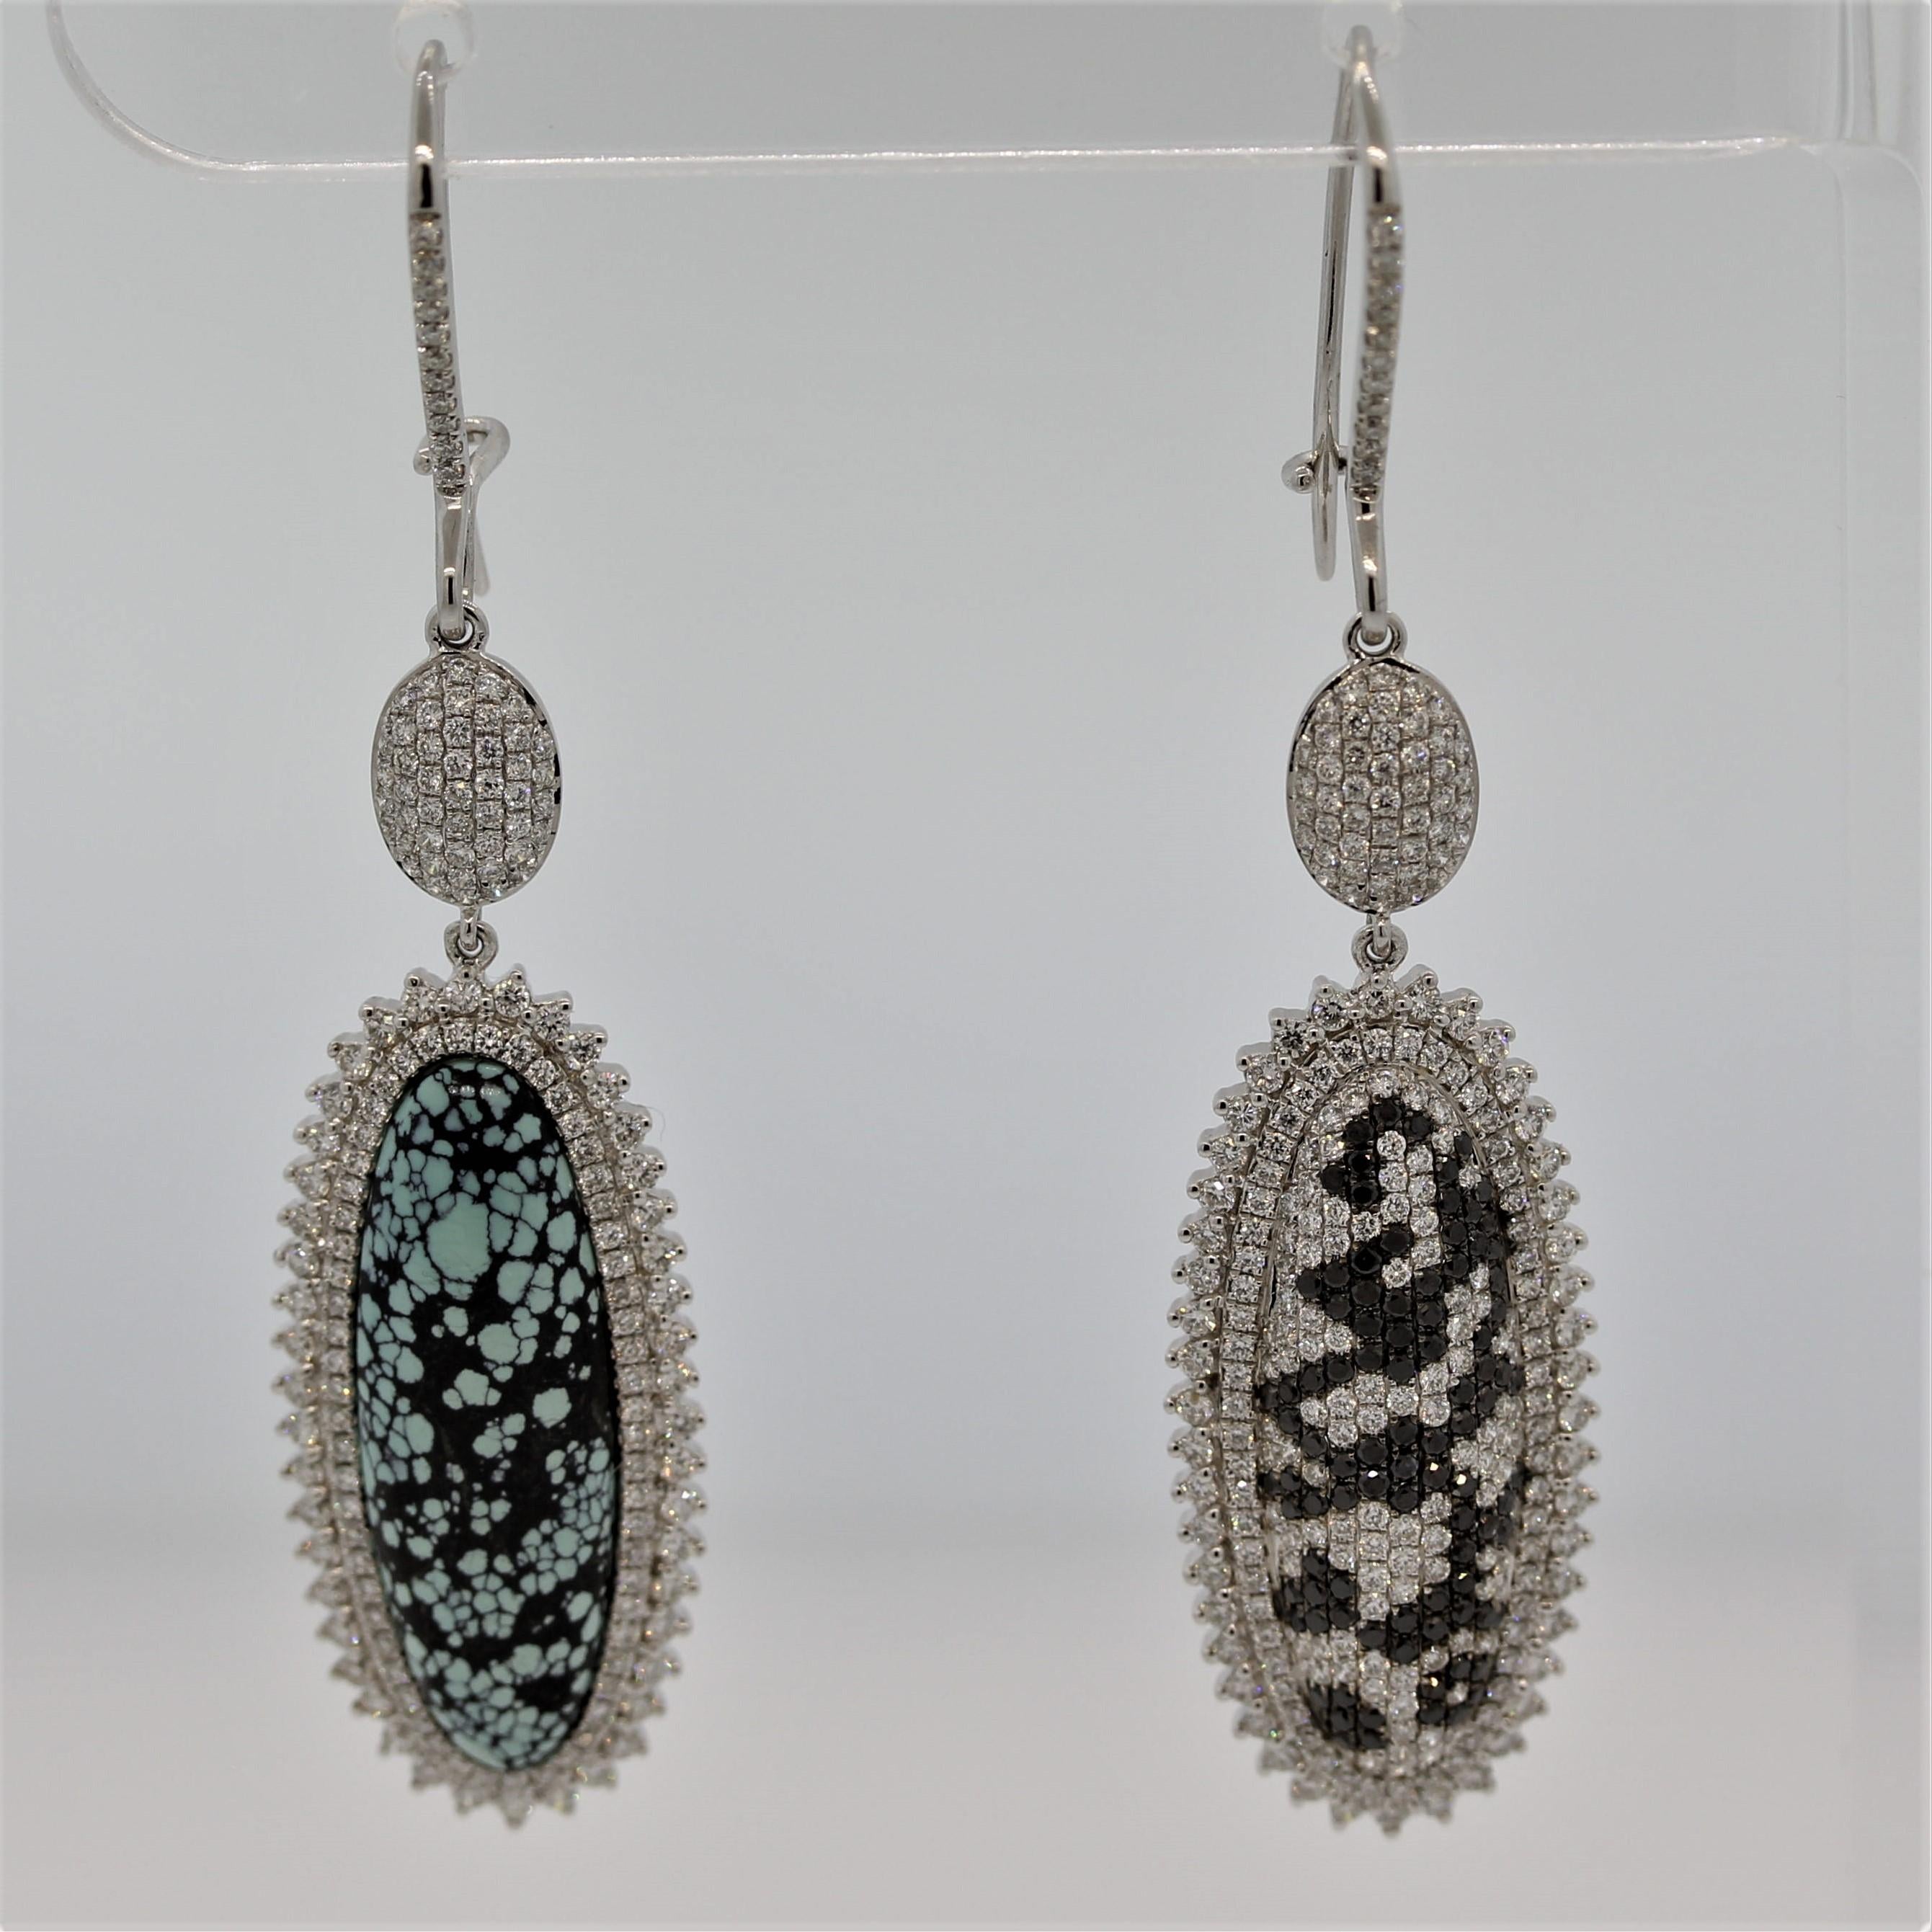 A stunning pair of earrings uniquely designed. The two earrings mirror each other in appearance but are set with different stones. Of the earrings is set with a natural turquoise with a web matrix while the other earring is set with black and white